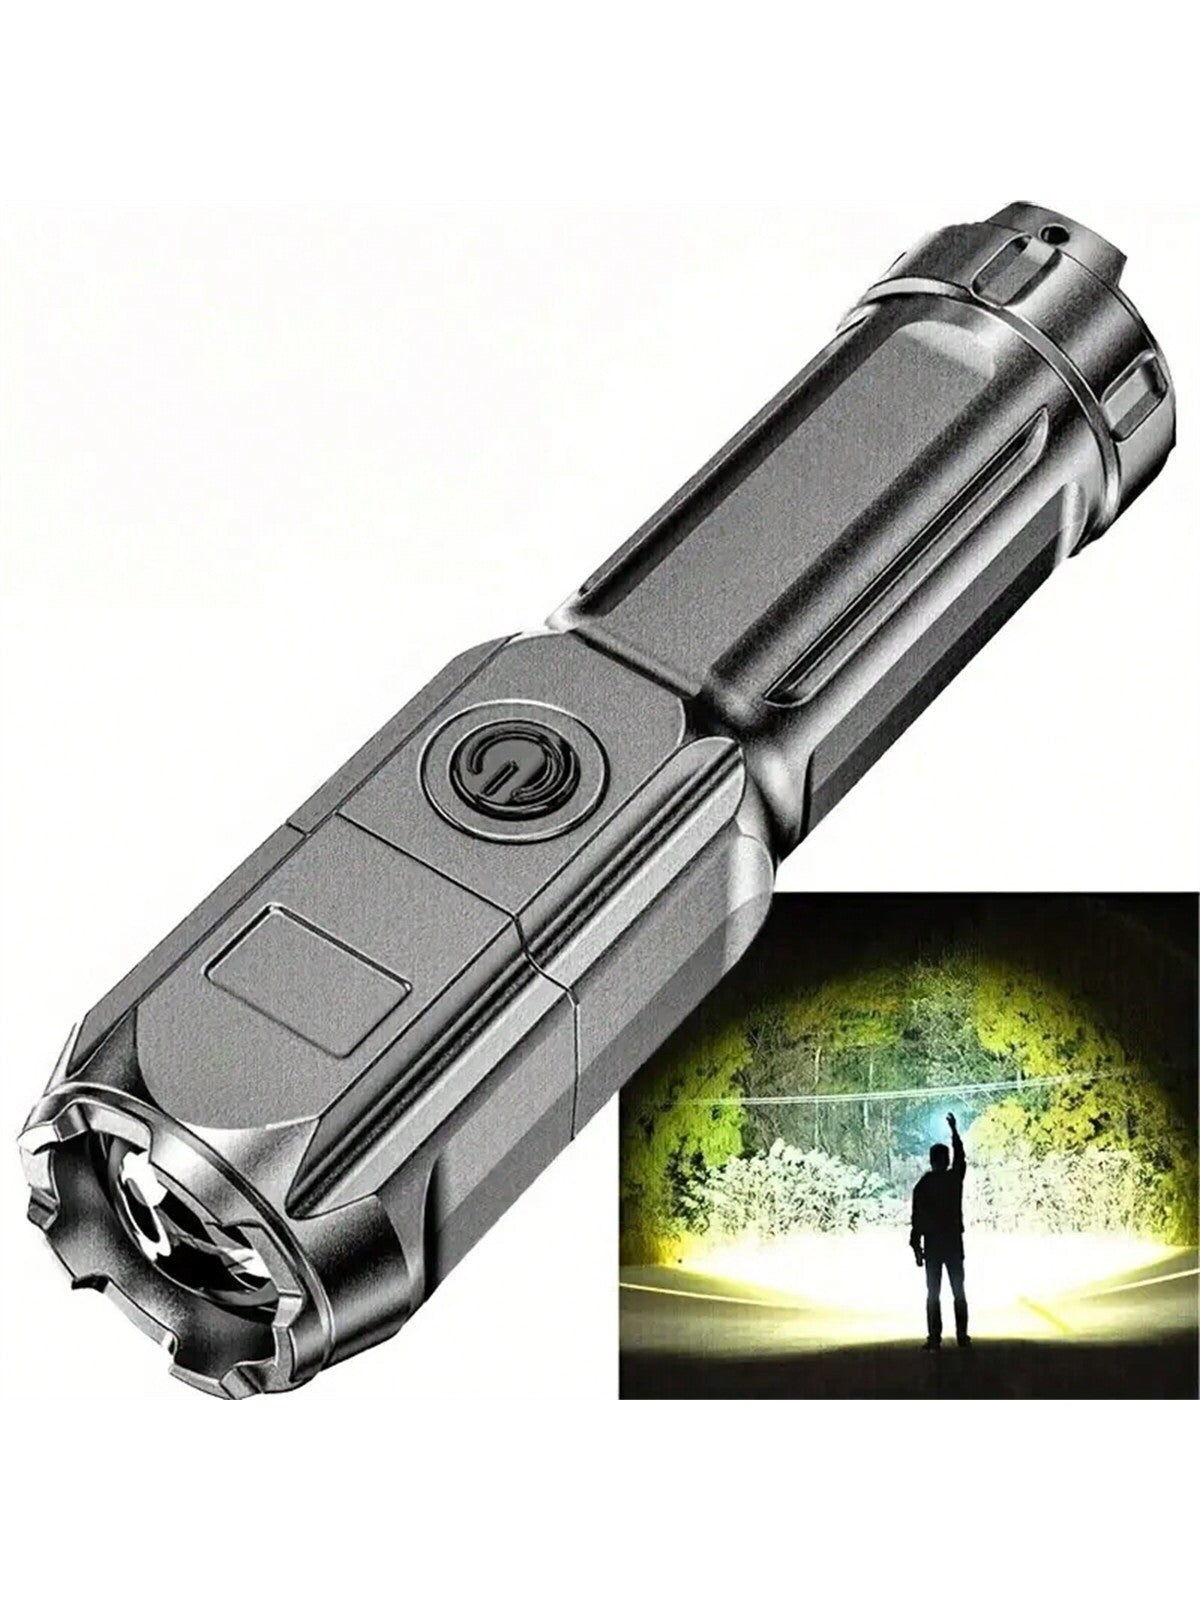 1pc Super Bright Zoomable Flashlight - Portable, Multi-Functional,  Telescopic Zoom For Outdoor Home Use Rechargeable Flashlights, Mini  Zoomable Flashl